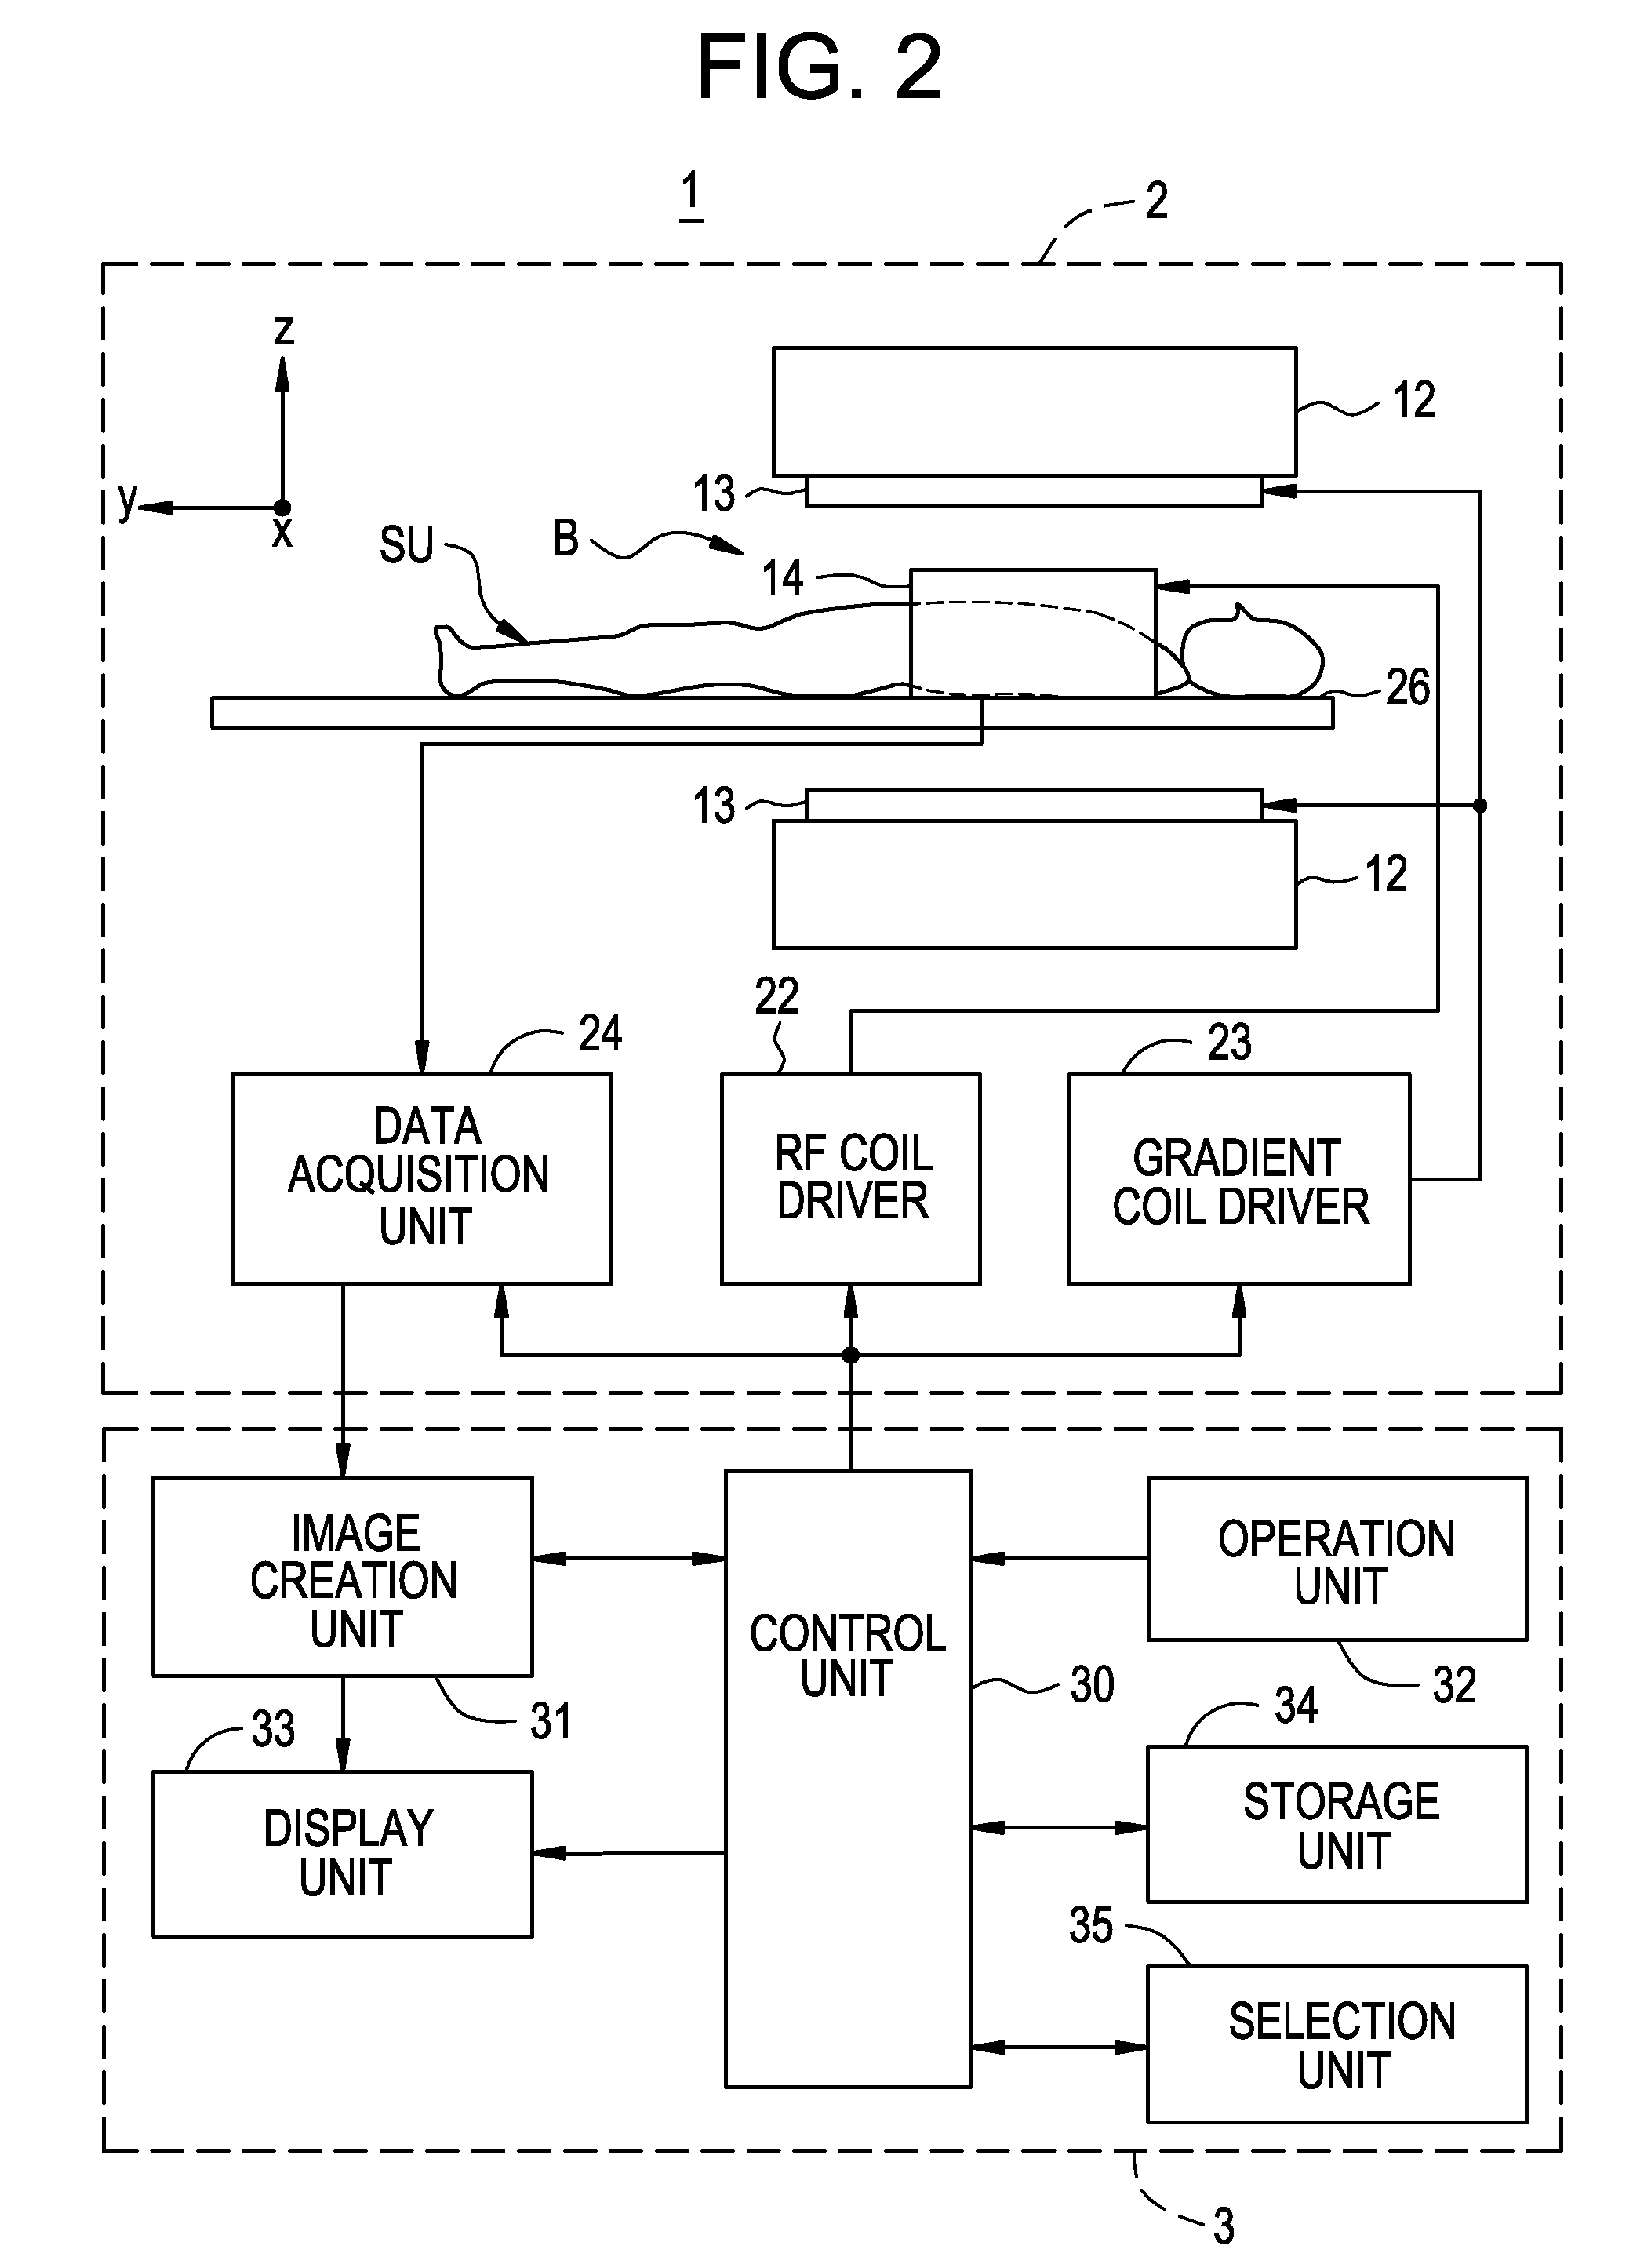 Imaging diagnosis system and its operational apparatus